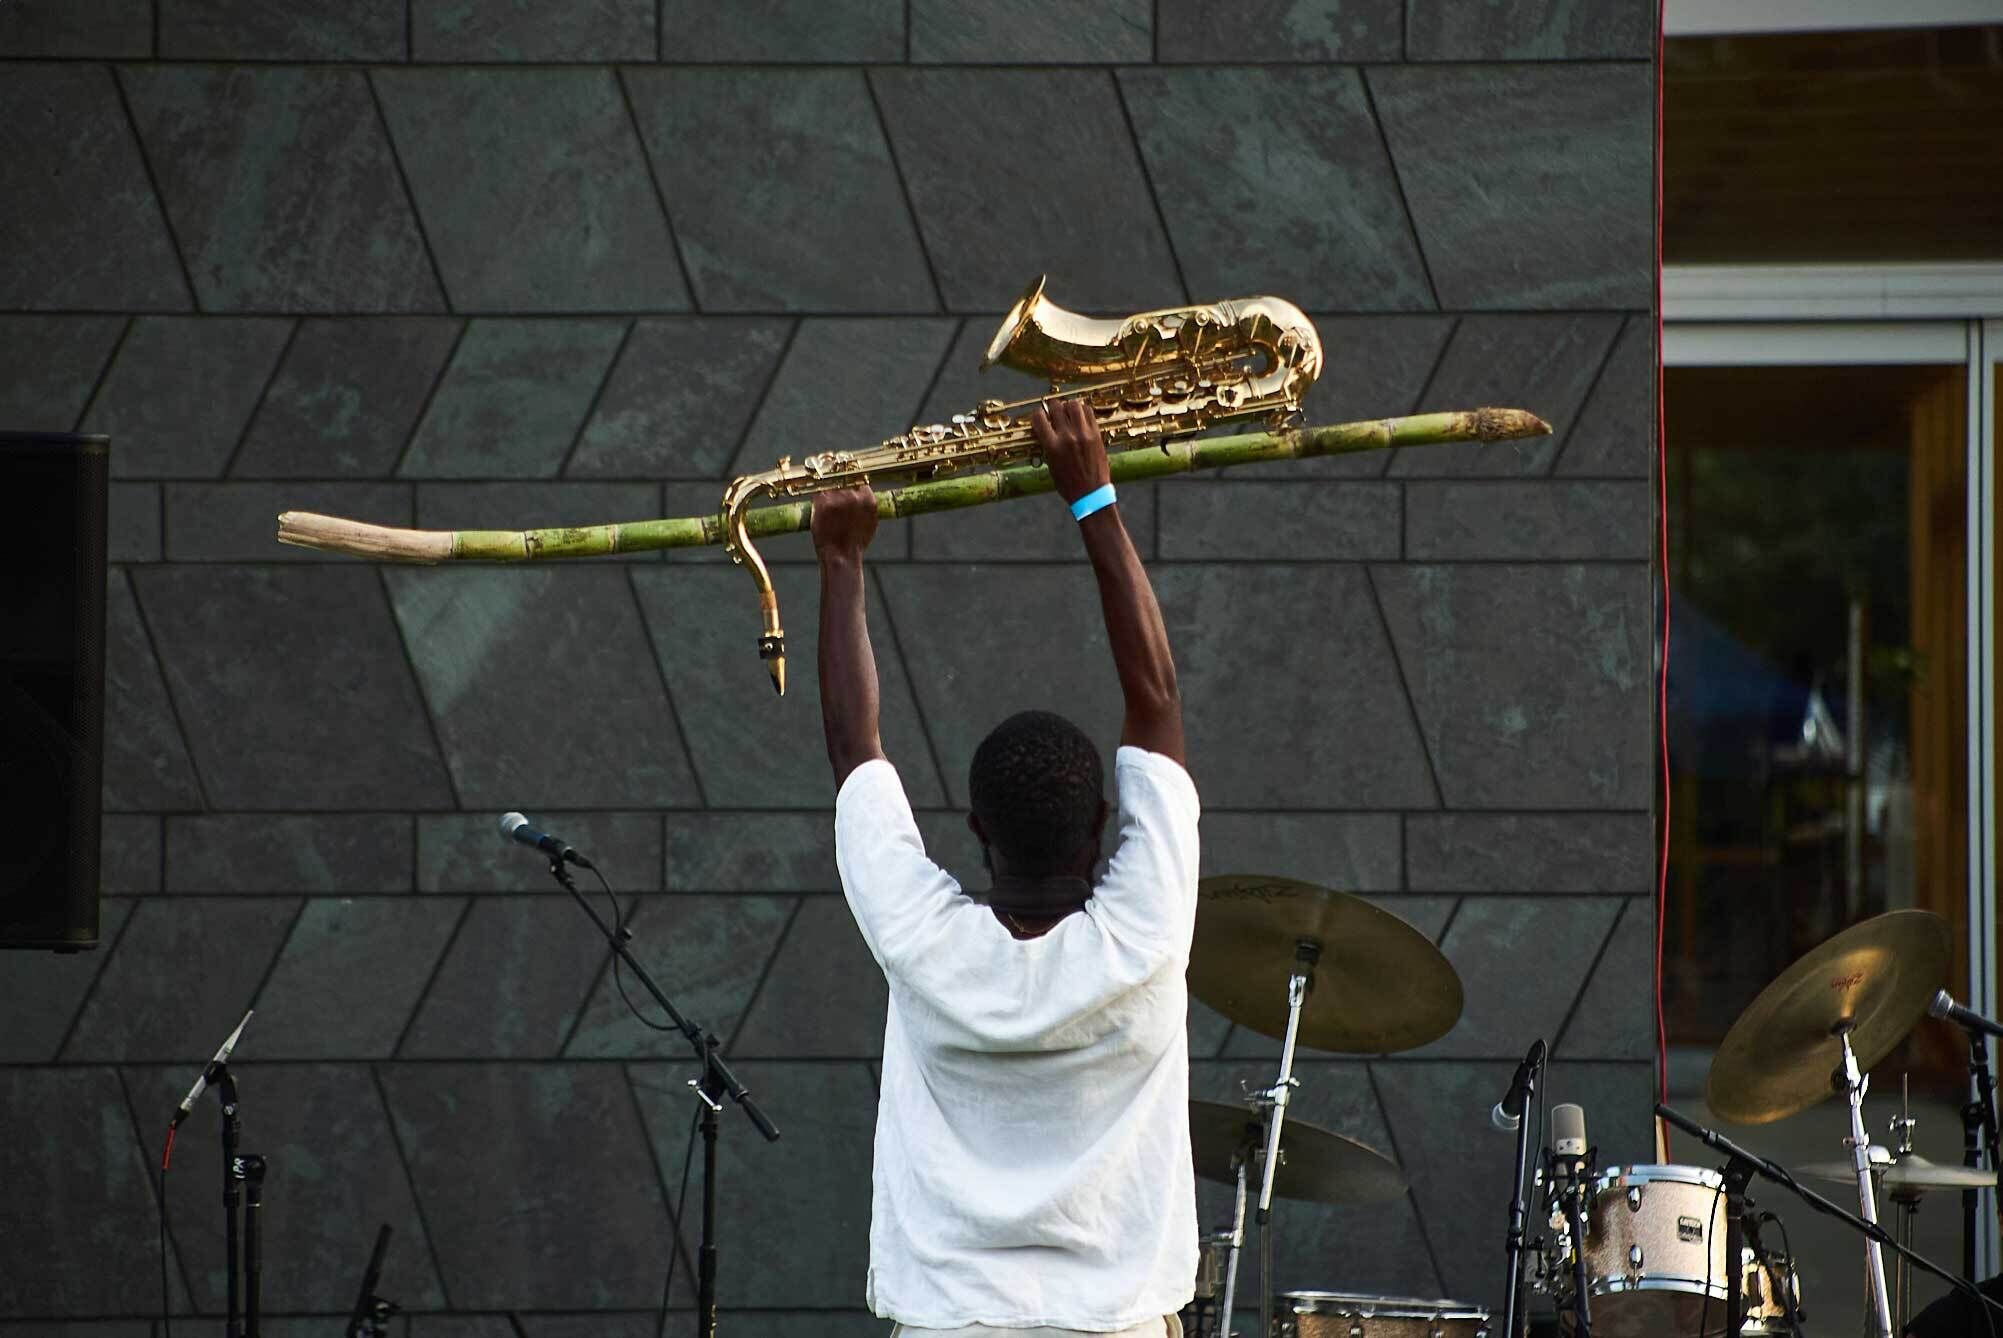 Musician holding a saxophone above his head on stage with drums and microphones in the background.